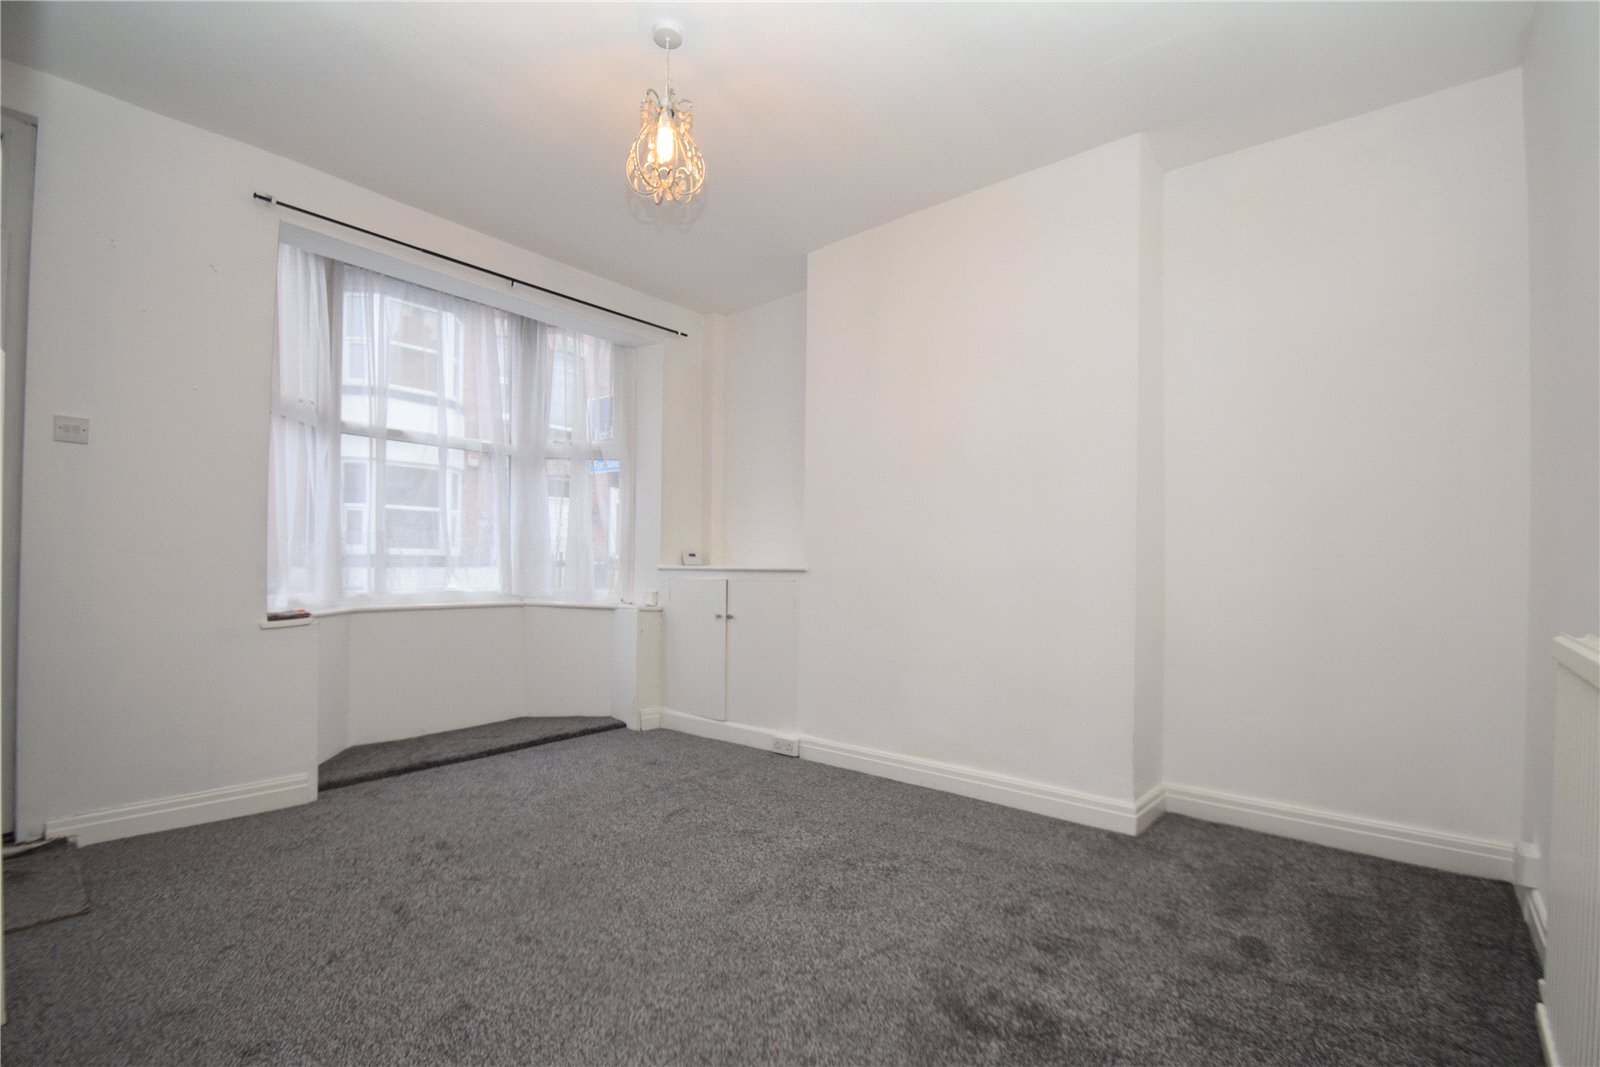 2 bed house for sale in Trafalgar Terrace, Scarborough  - Property Image 2